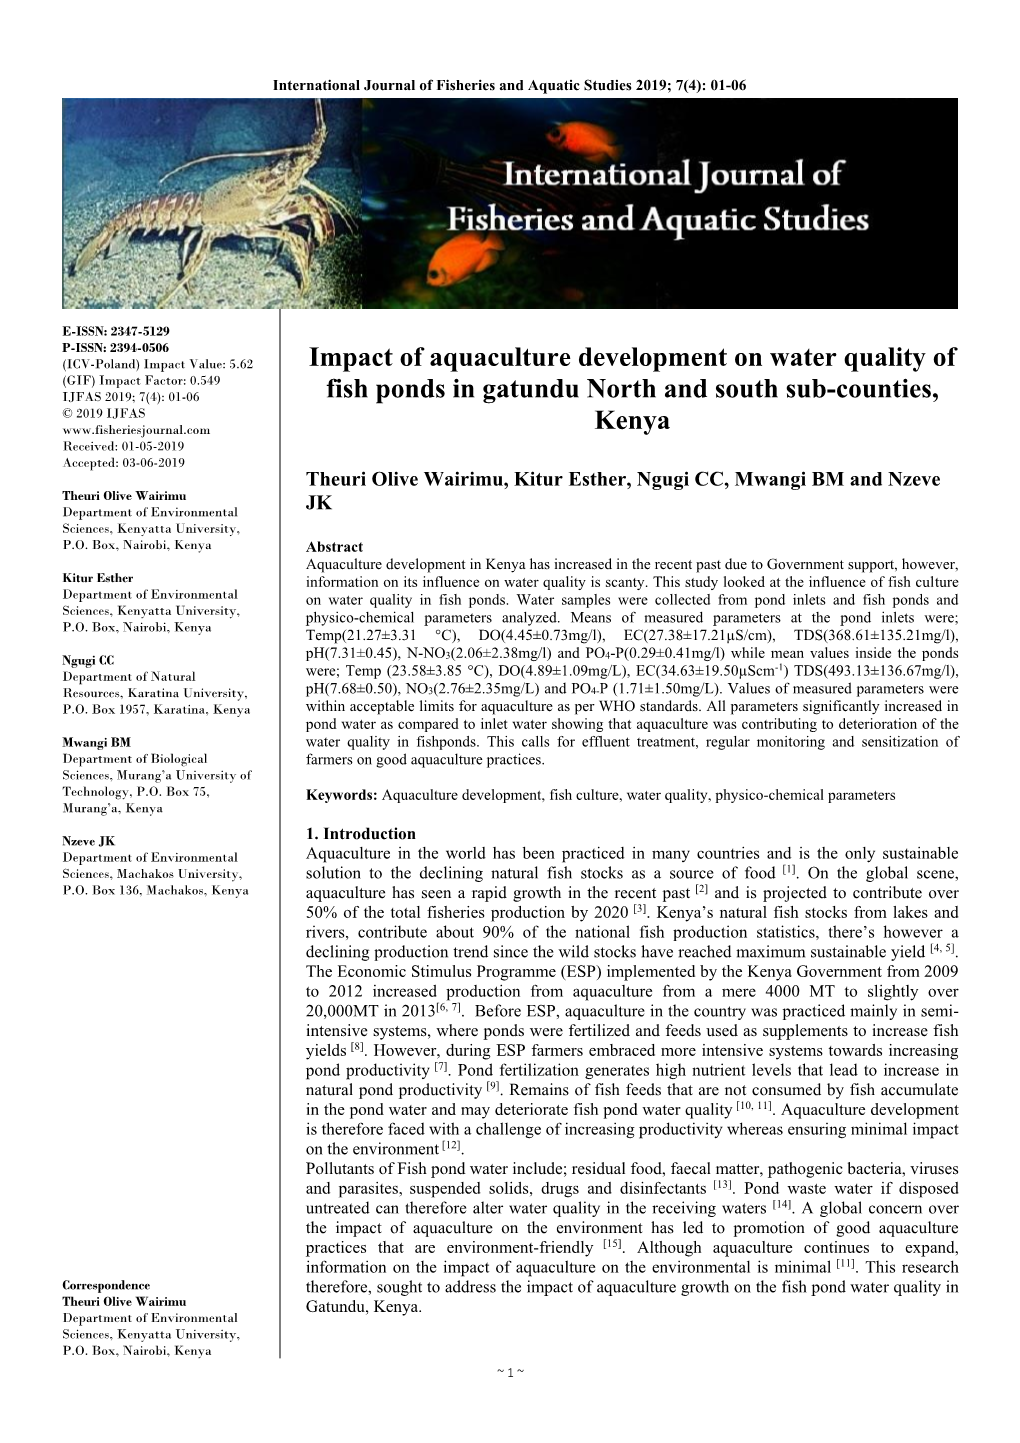 Impact of Aquaculture Development on Water Quality of Fish Ponds In